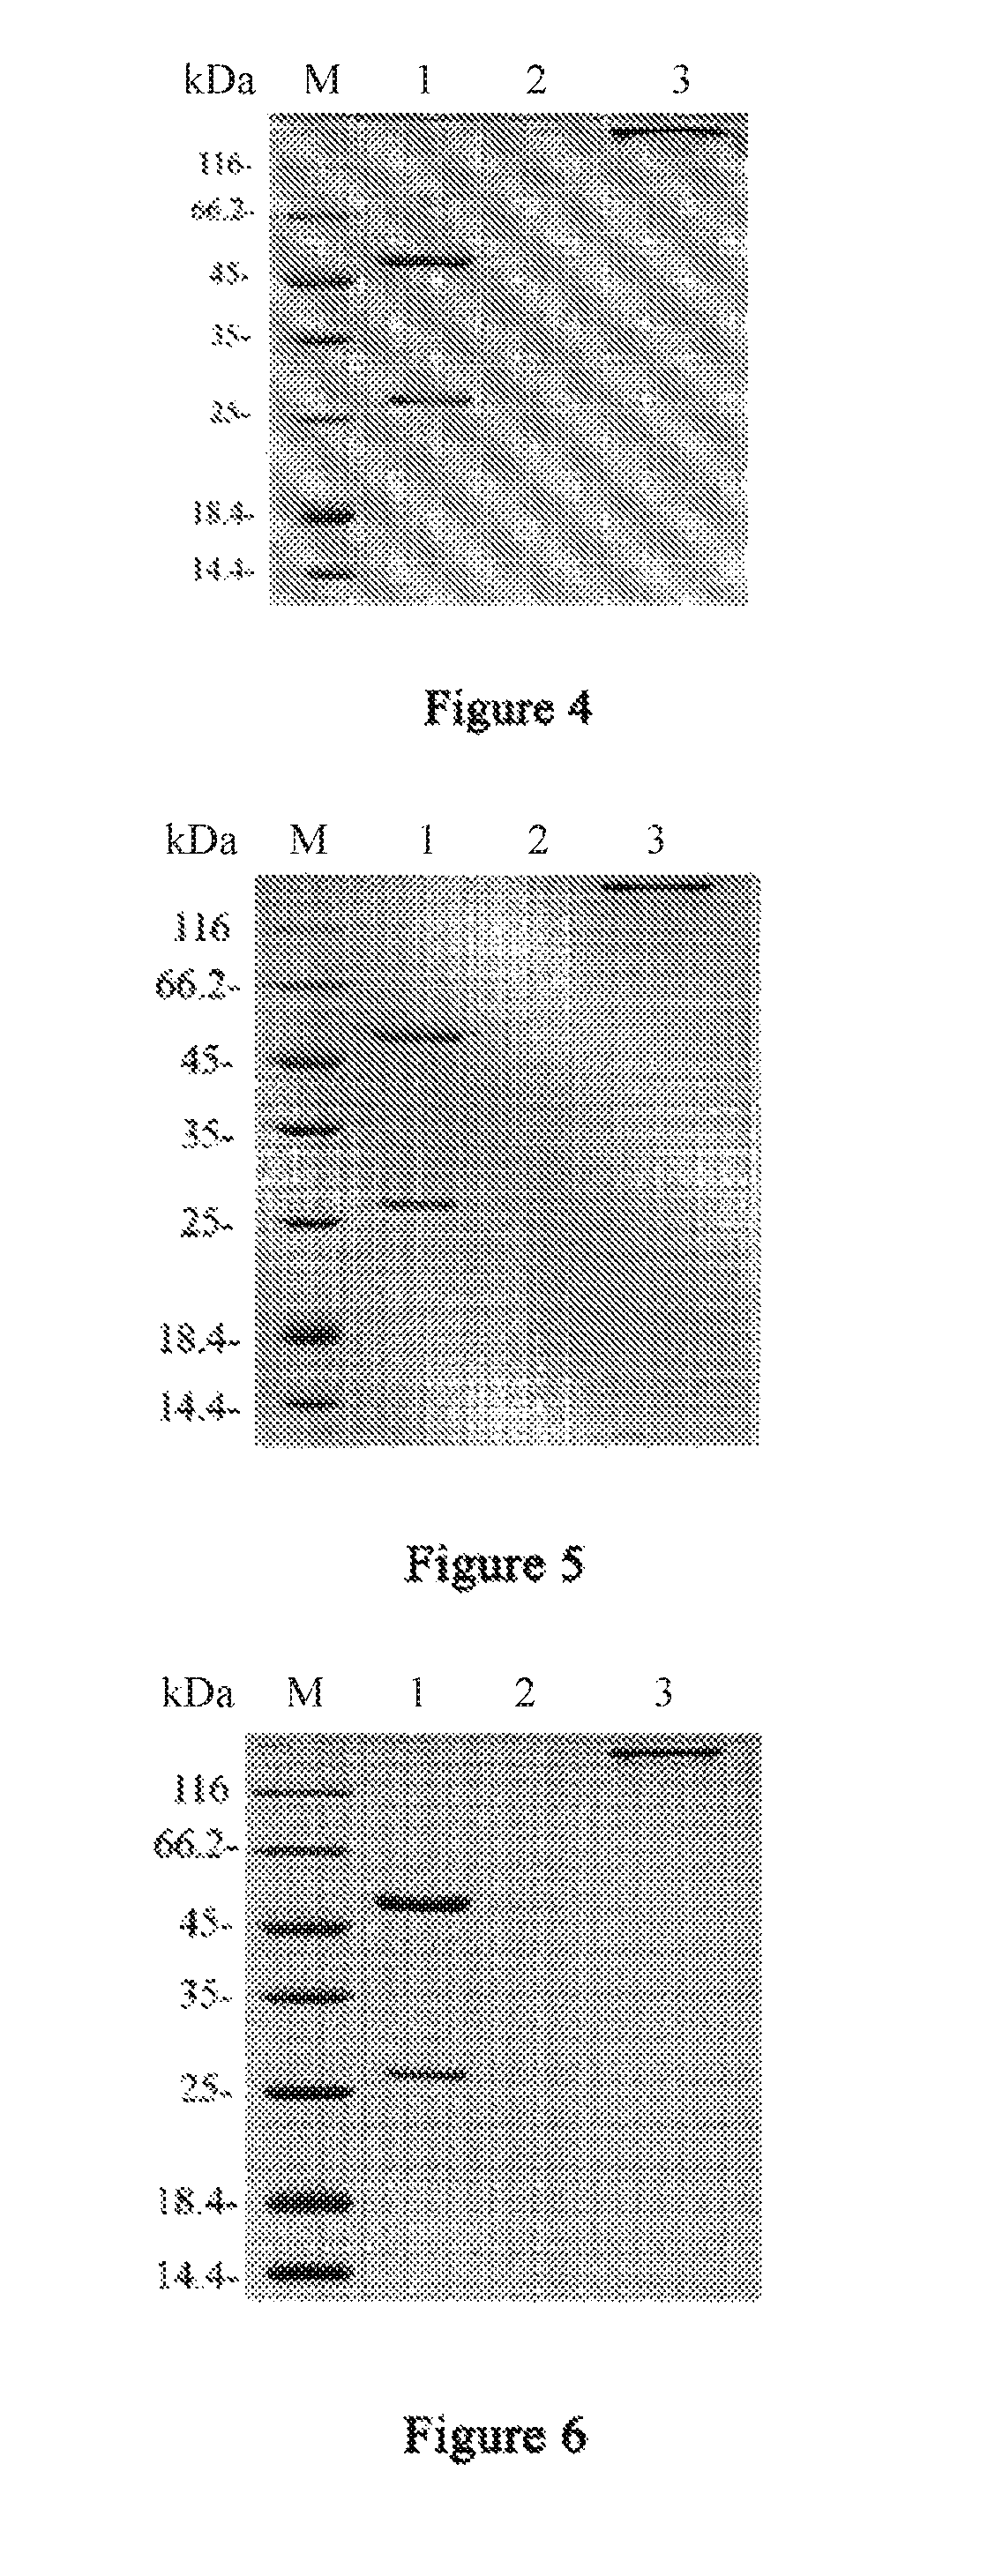 Anti-CTLA4 monoclonal antibody or its antigen binding fragments, pharmaceutical compositions and uses